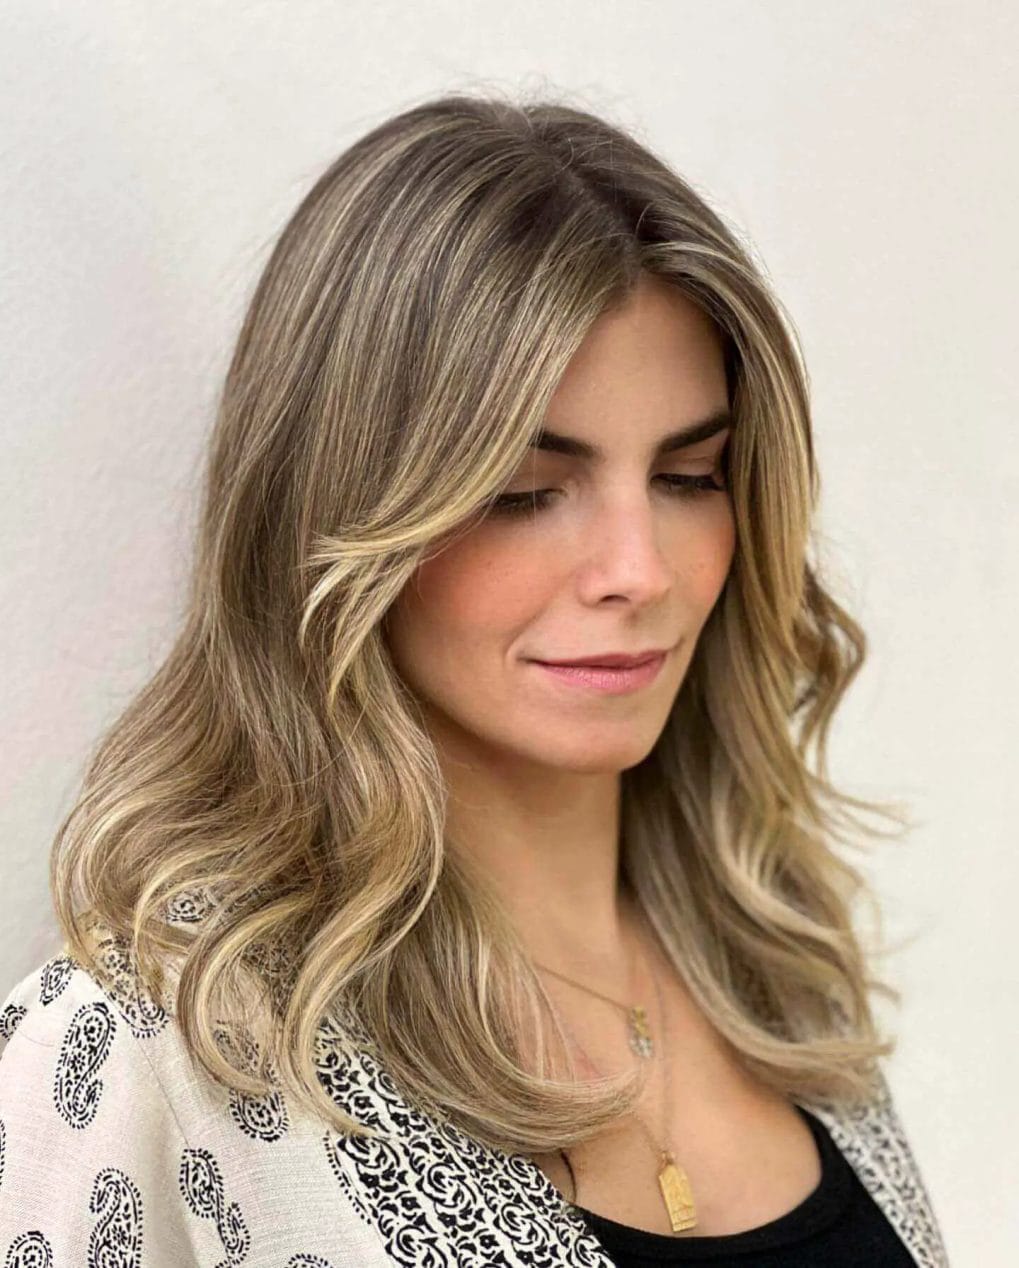 Medium-length hairstyle with natural soft waves and long, sweeping curtain bangs in cool and warm blonde balayage.